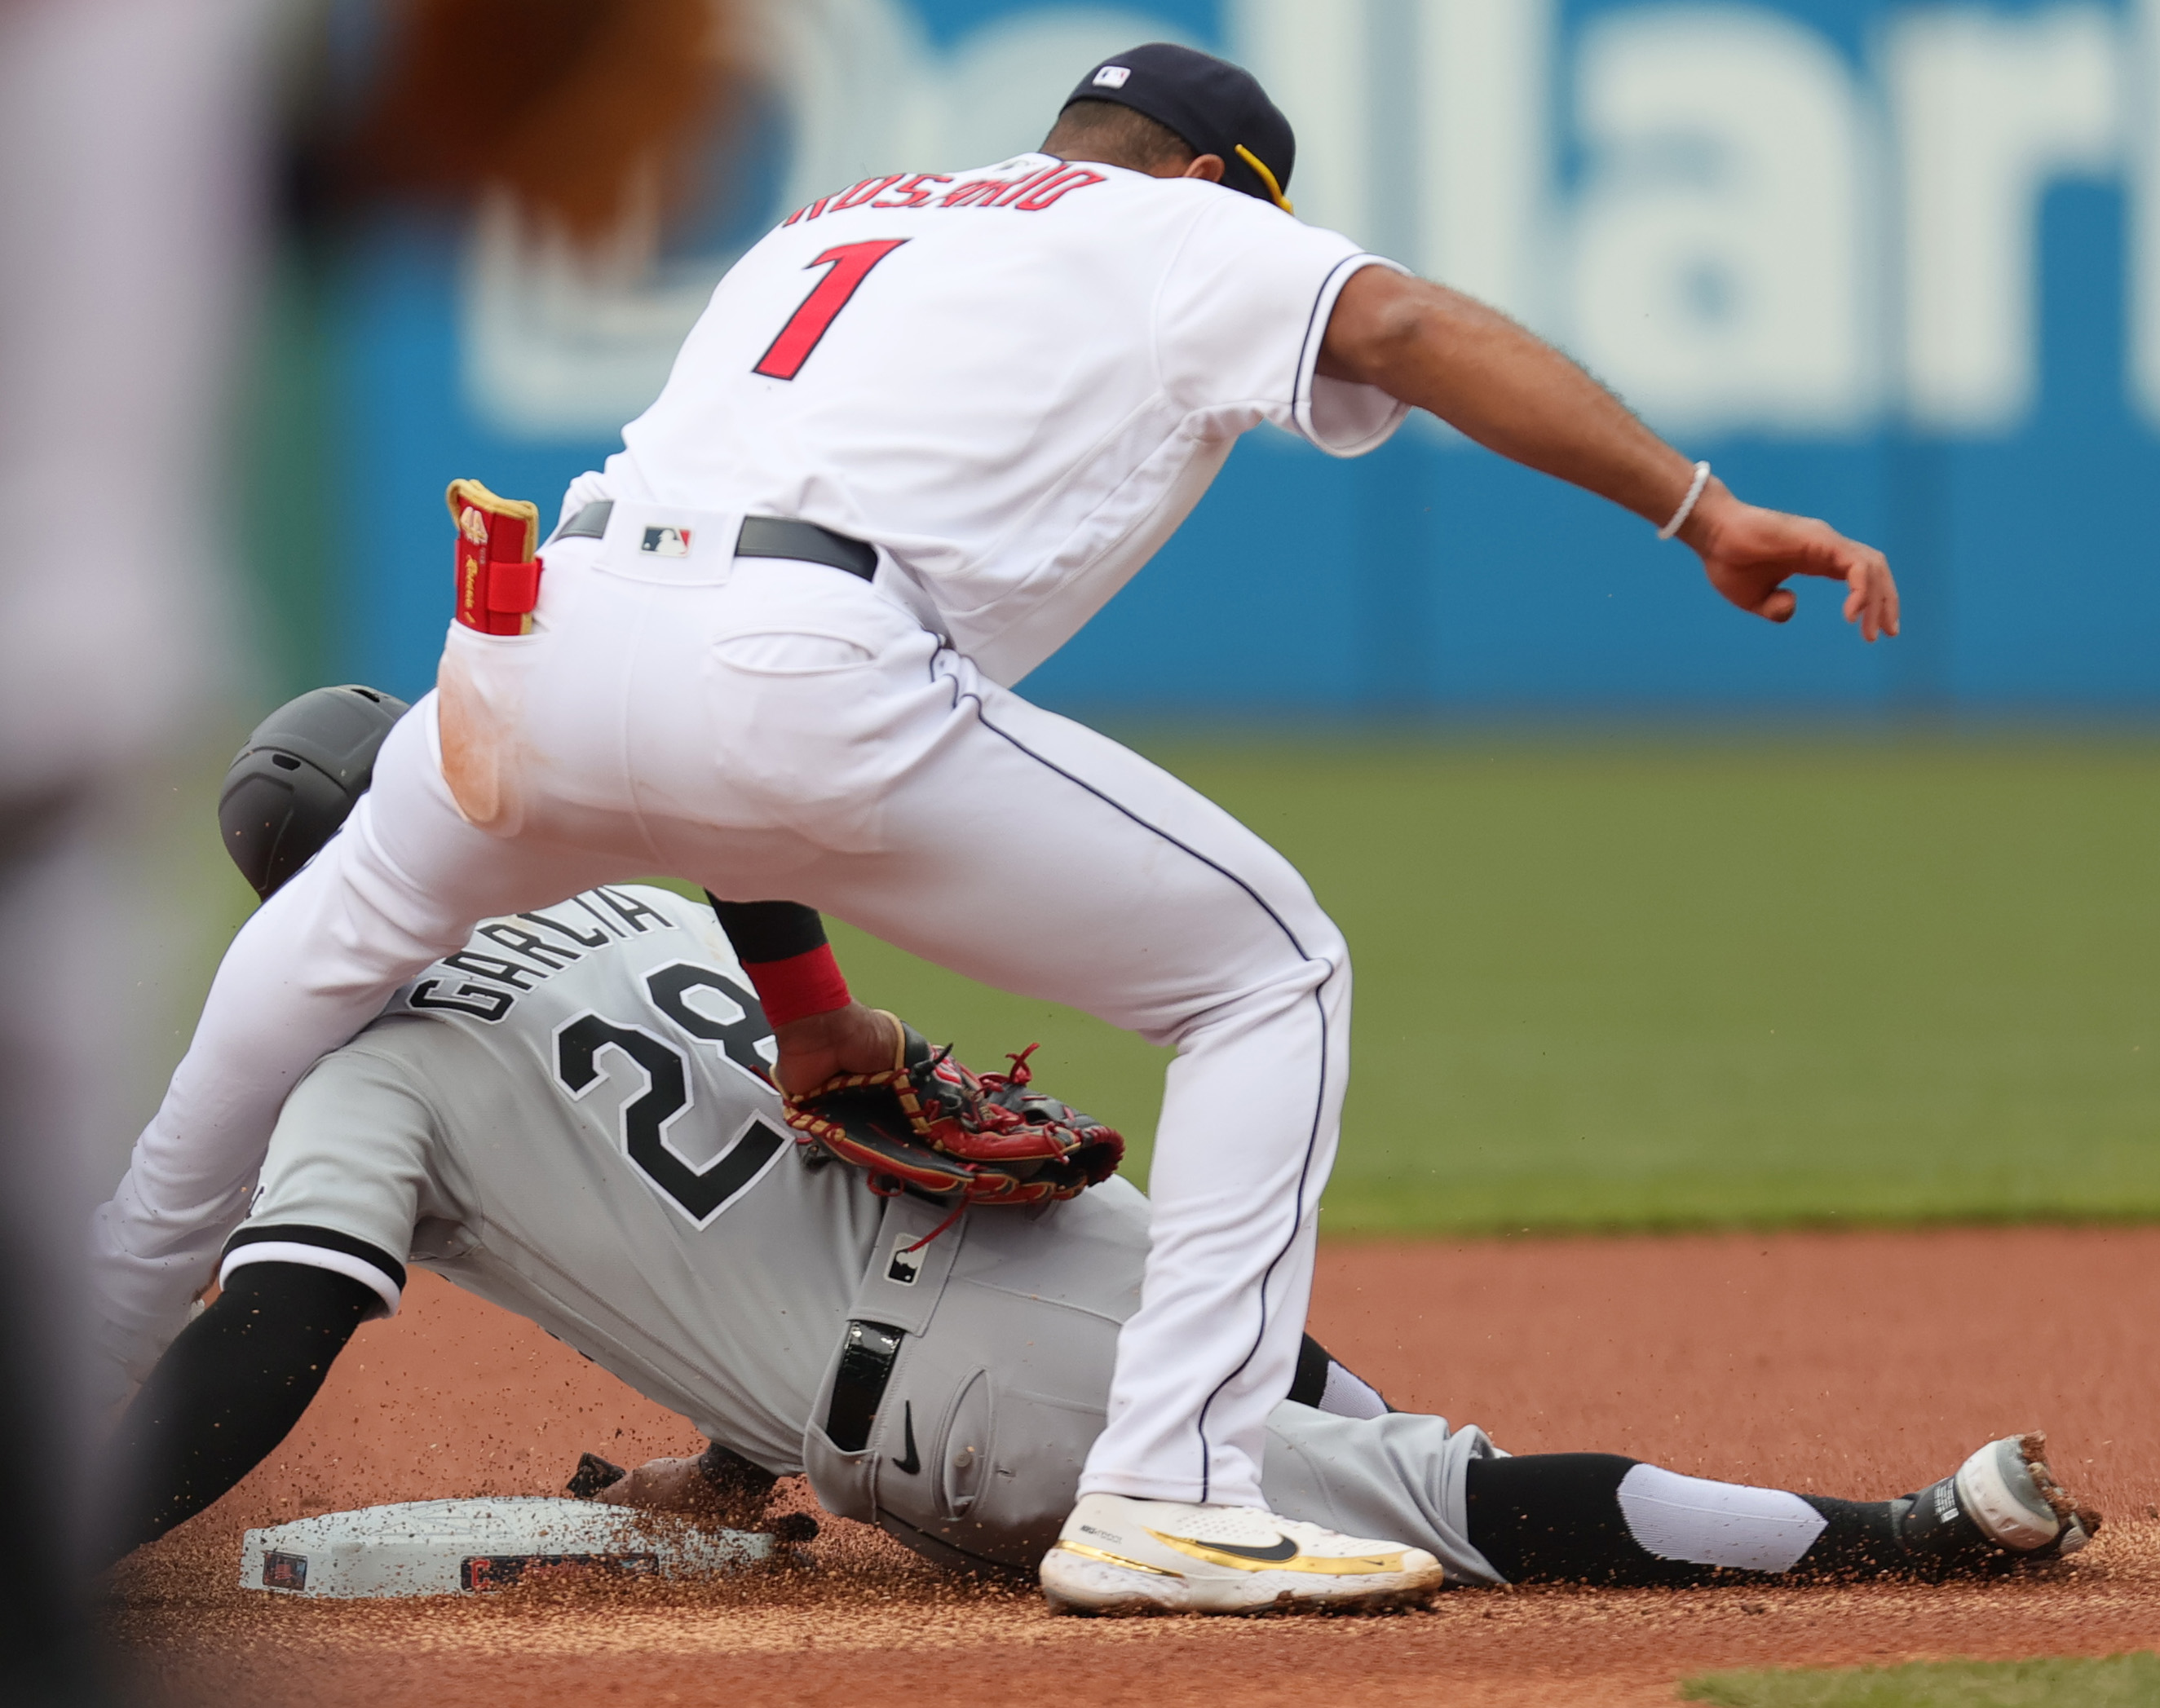 Cleveland, USA. 21st Apr, 2022. Chicago White Sox's Leury Garcia (28)  throws to first base against the Cleveland Guardians in the sixth inning at  Progressive Field in Cleveland, Ohio on Thursday, April